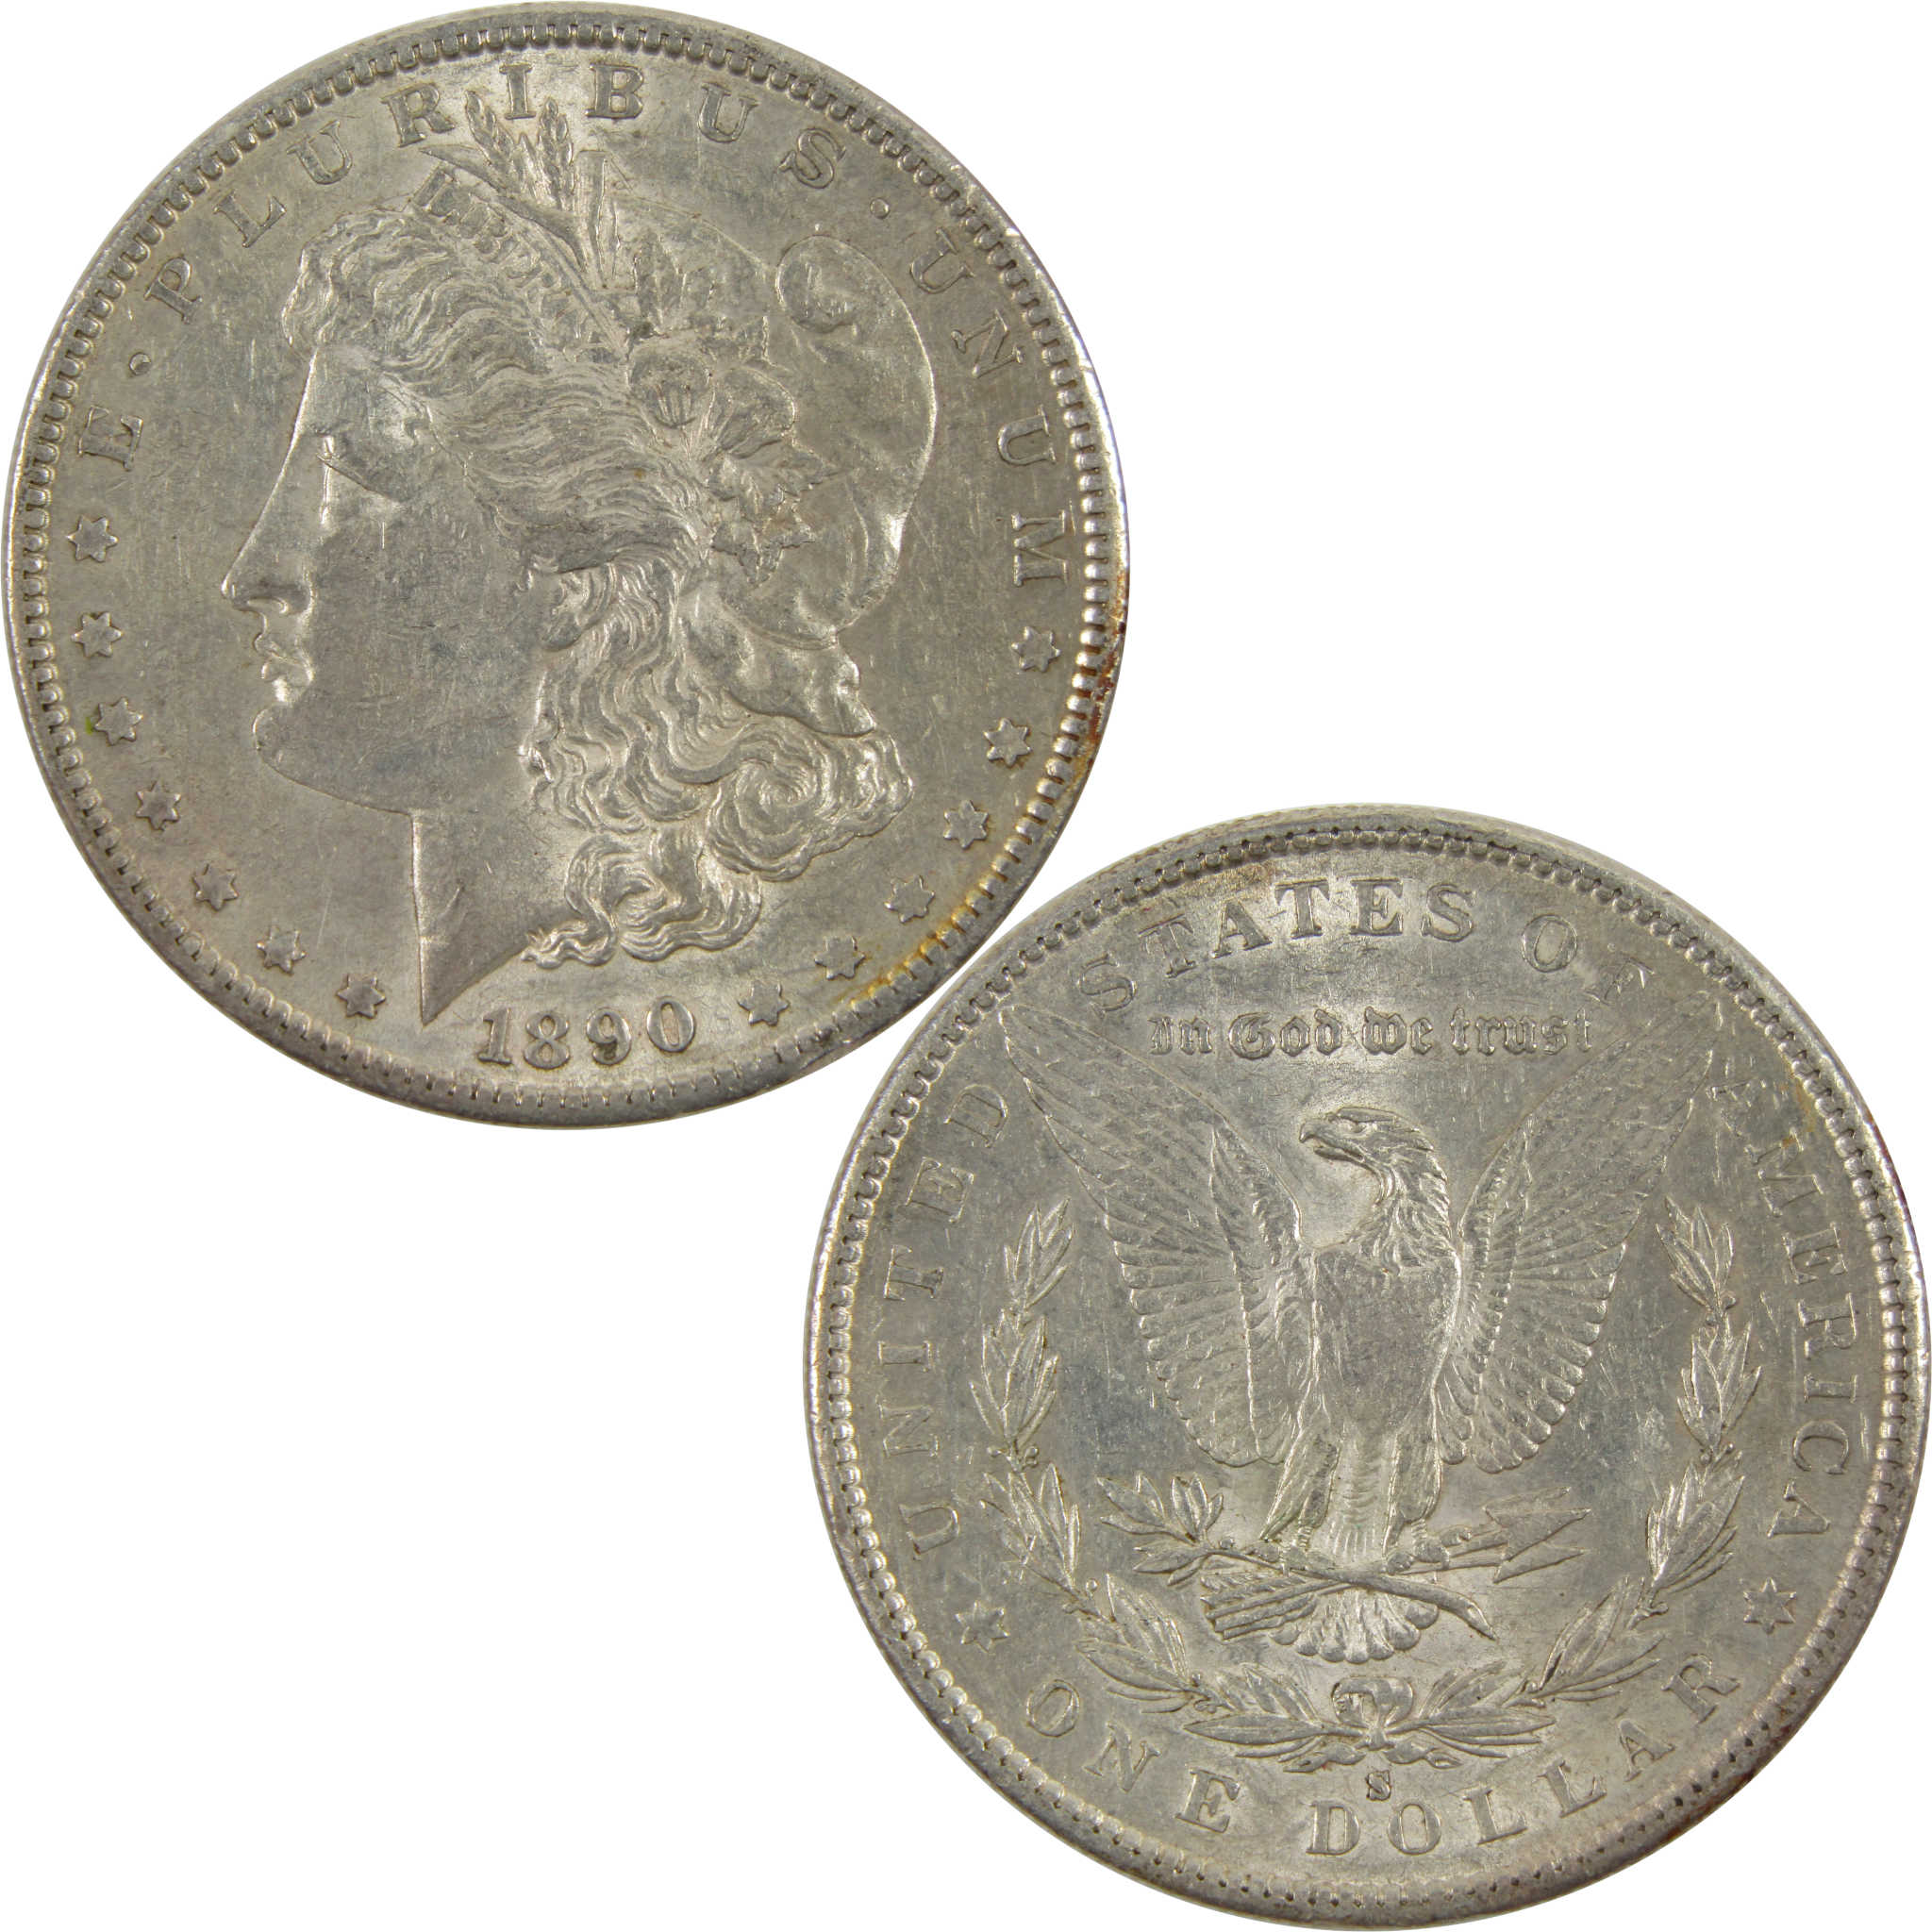 1890 S Morgan Dollar AU About Uncirculated 90% Silver SKU:I7563 - Morgan coin - Morgan silver dollar - Morgan silver dollar for sale - Profile Coins &amp; Collectibles